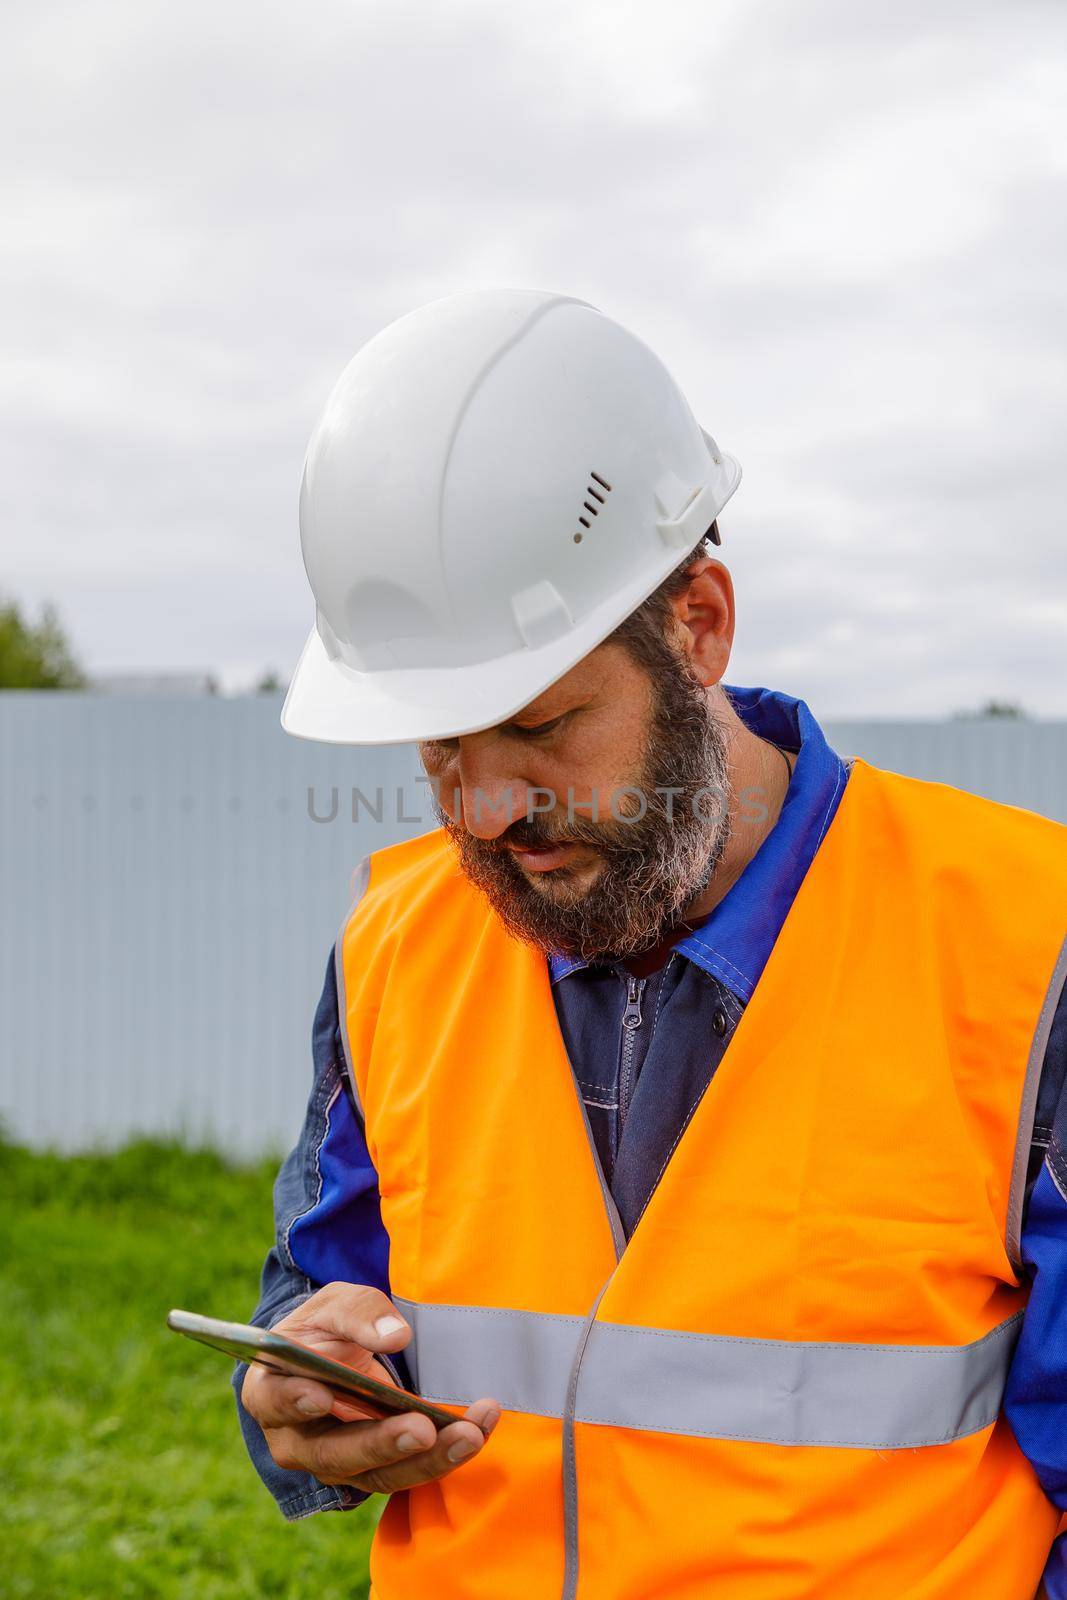 A civil engineer looks at a mobile phone. A bearded man is looking for information on his mobile phone by Yurich32